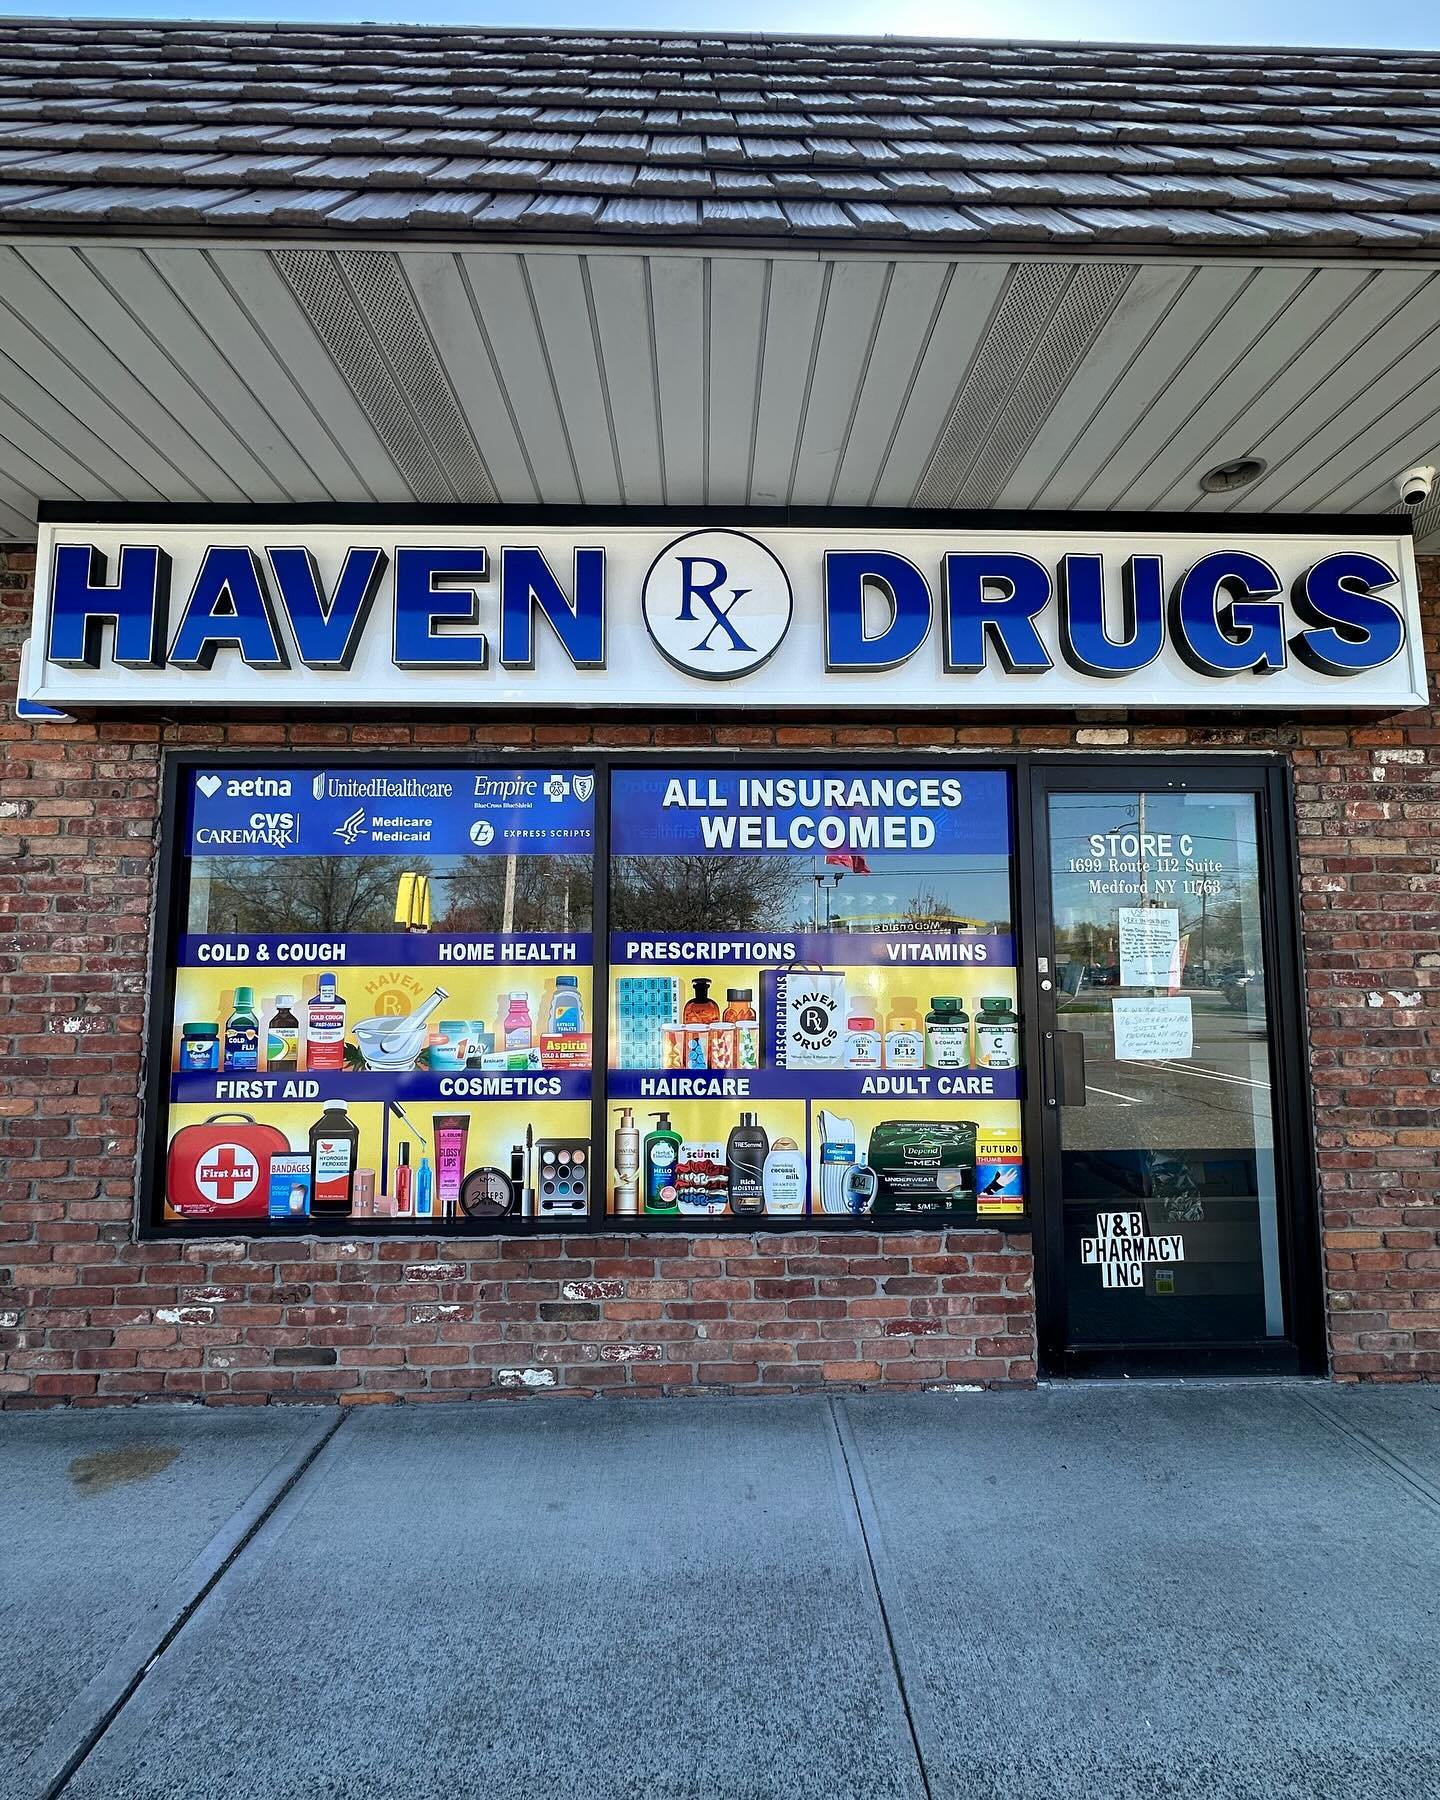 Freshly designed storefront windows for Haven Drugs grand opening. Check out the before &amp; after video.

#pharmacy #windowgraphics #community